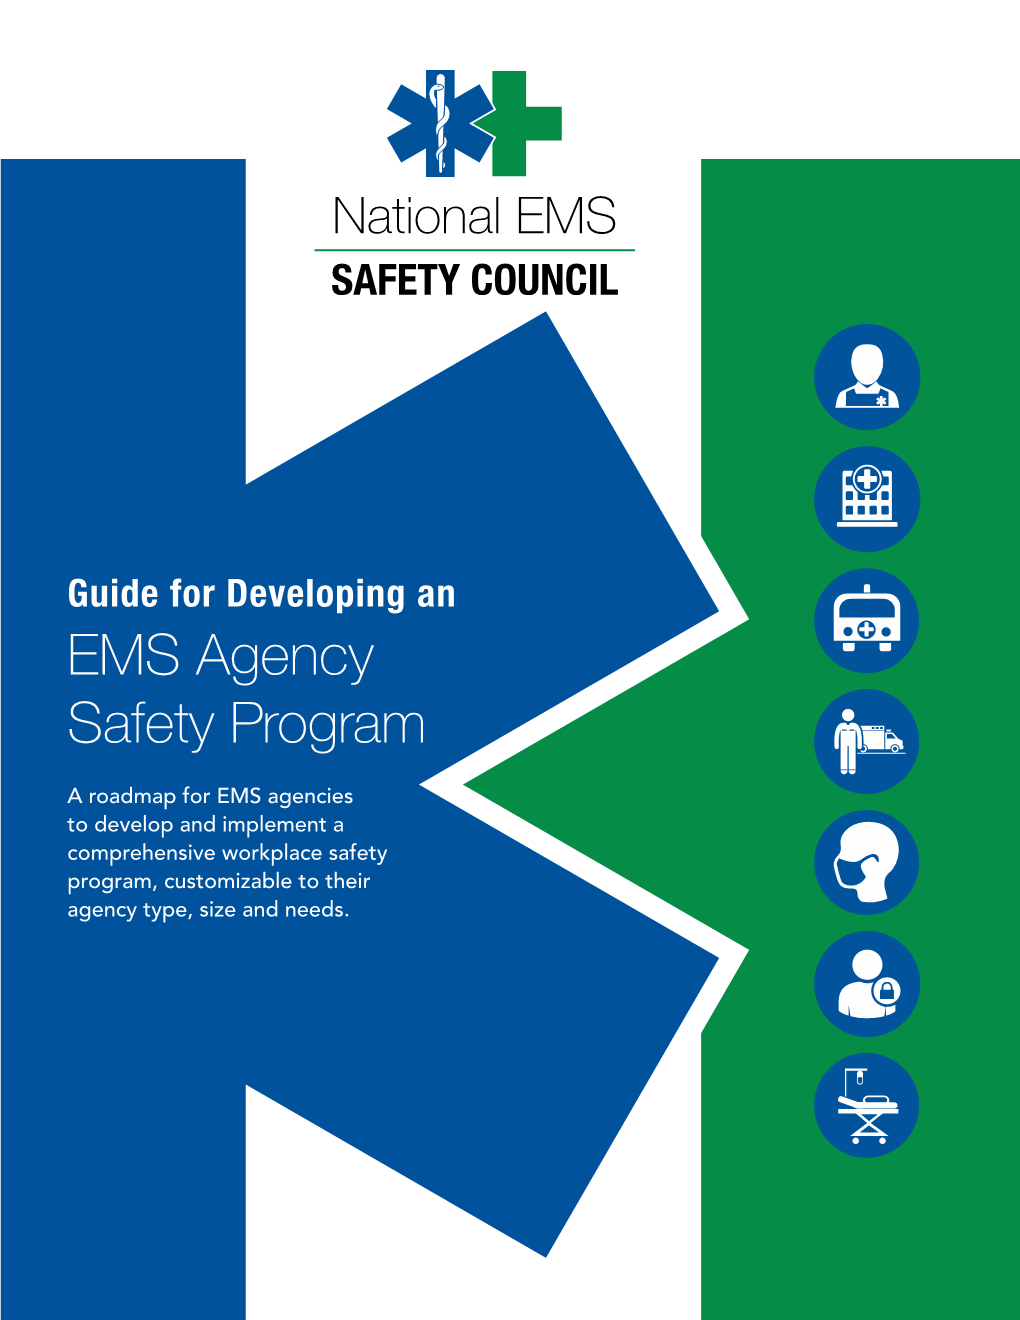 Guide for Developing an EMS Agency Safety Program